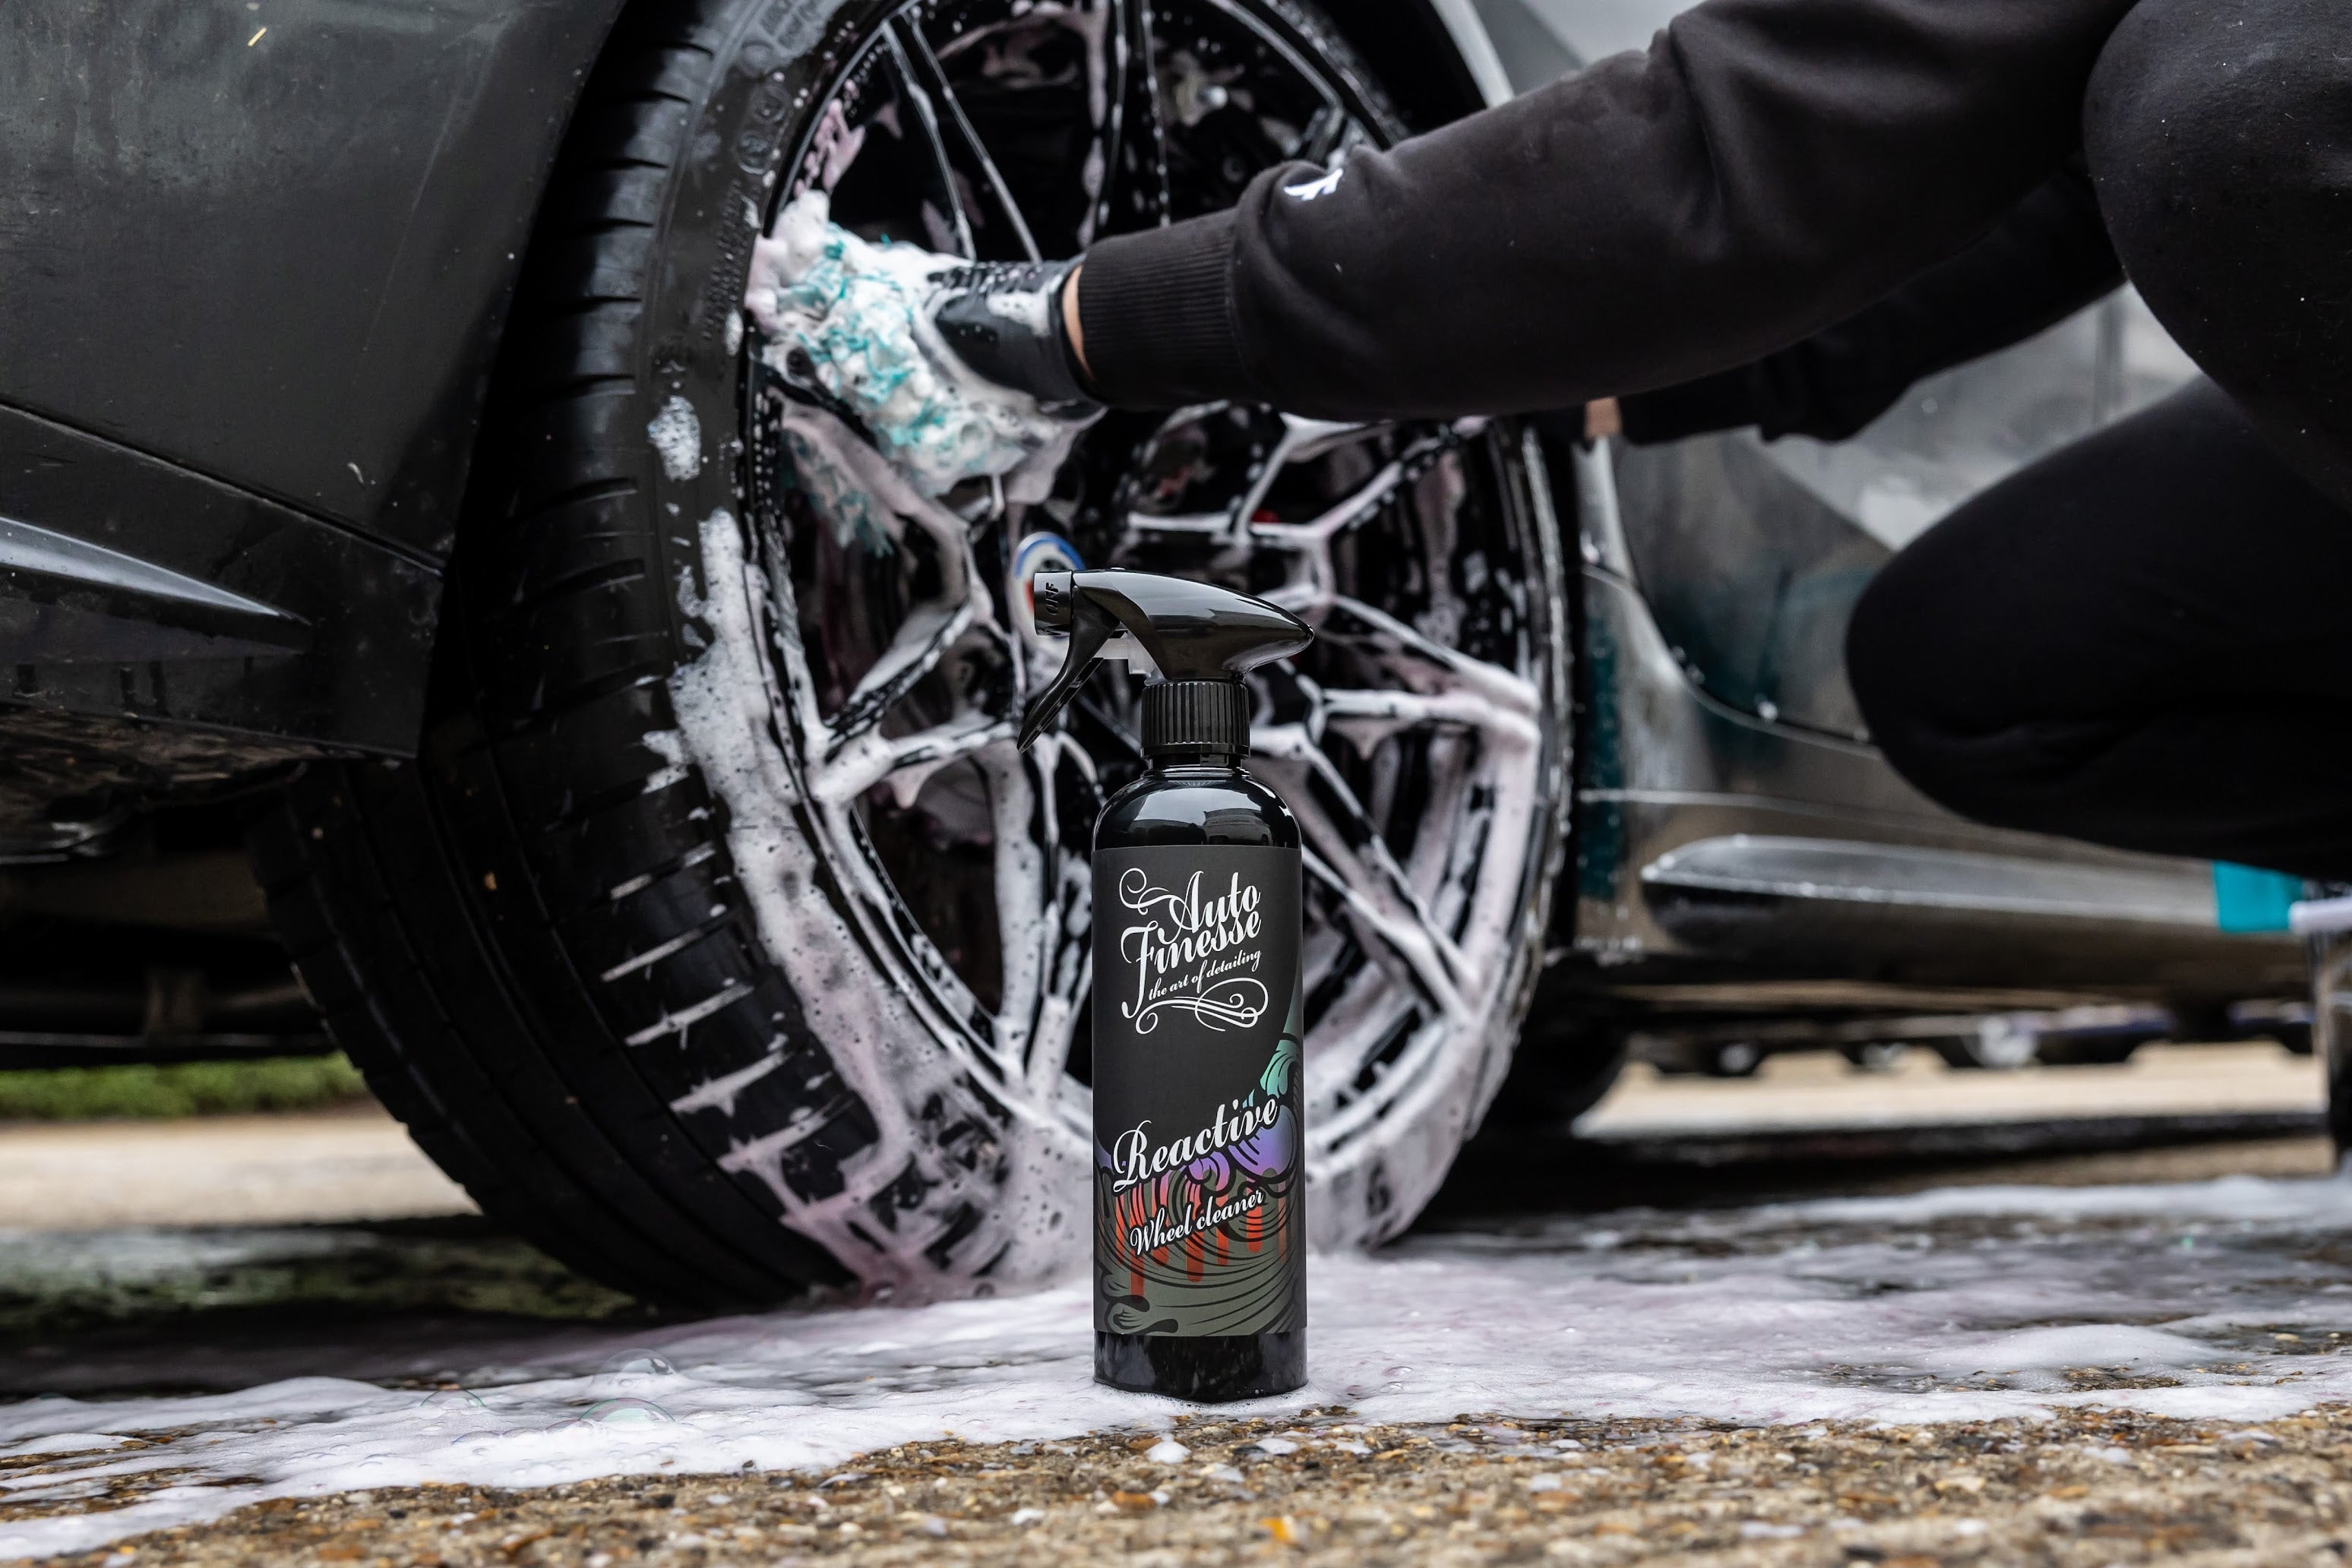 Clean Your Car-Car Exterior Cleaner